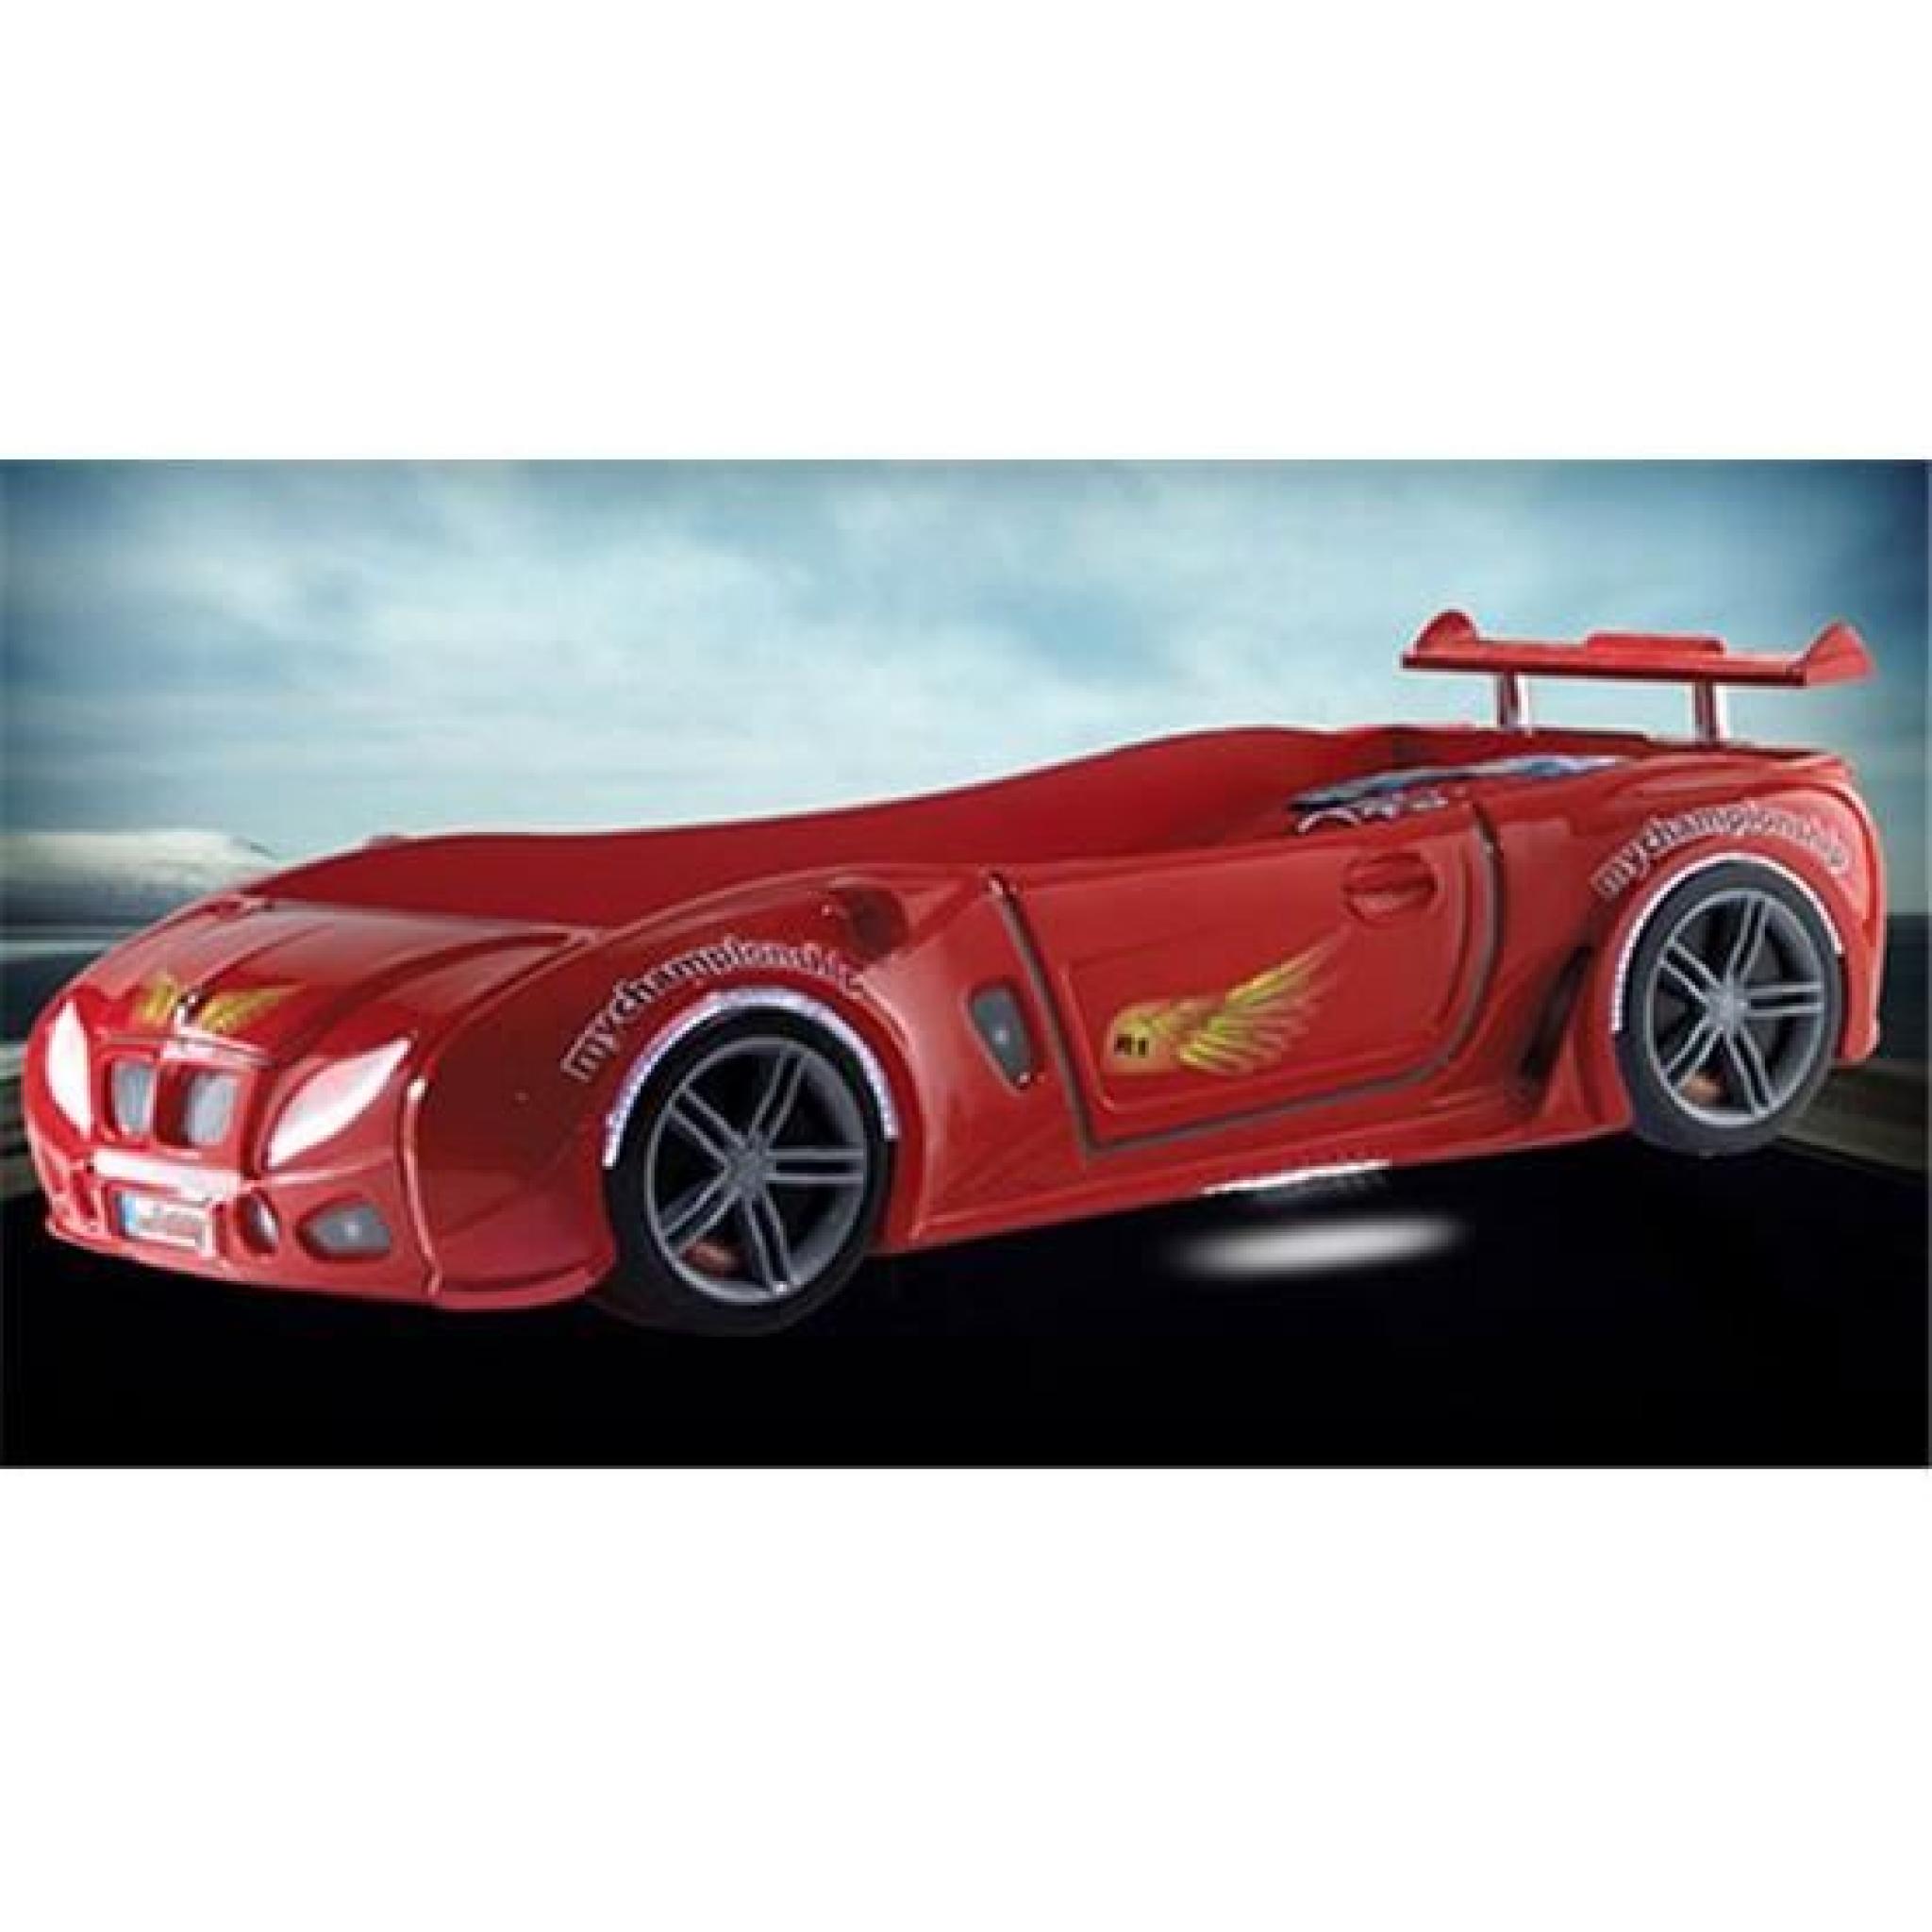 Lit enfant voiture racing Airone rouge   